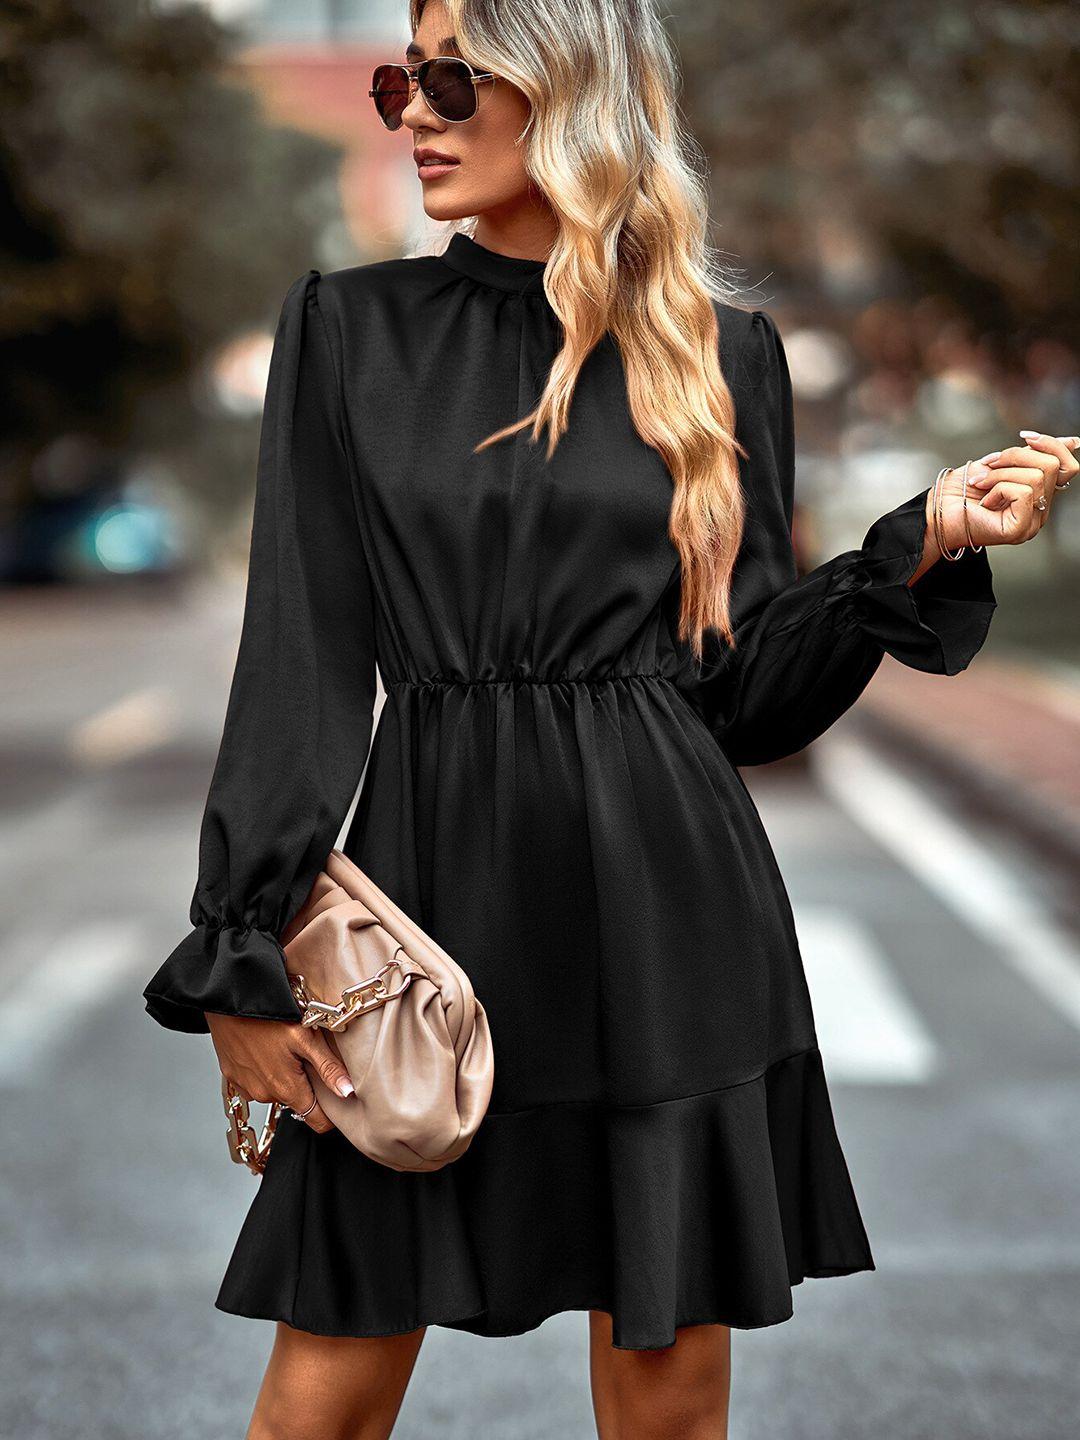 stylecast black puff sleeved fit and flare dress